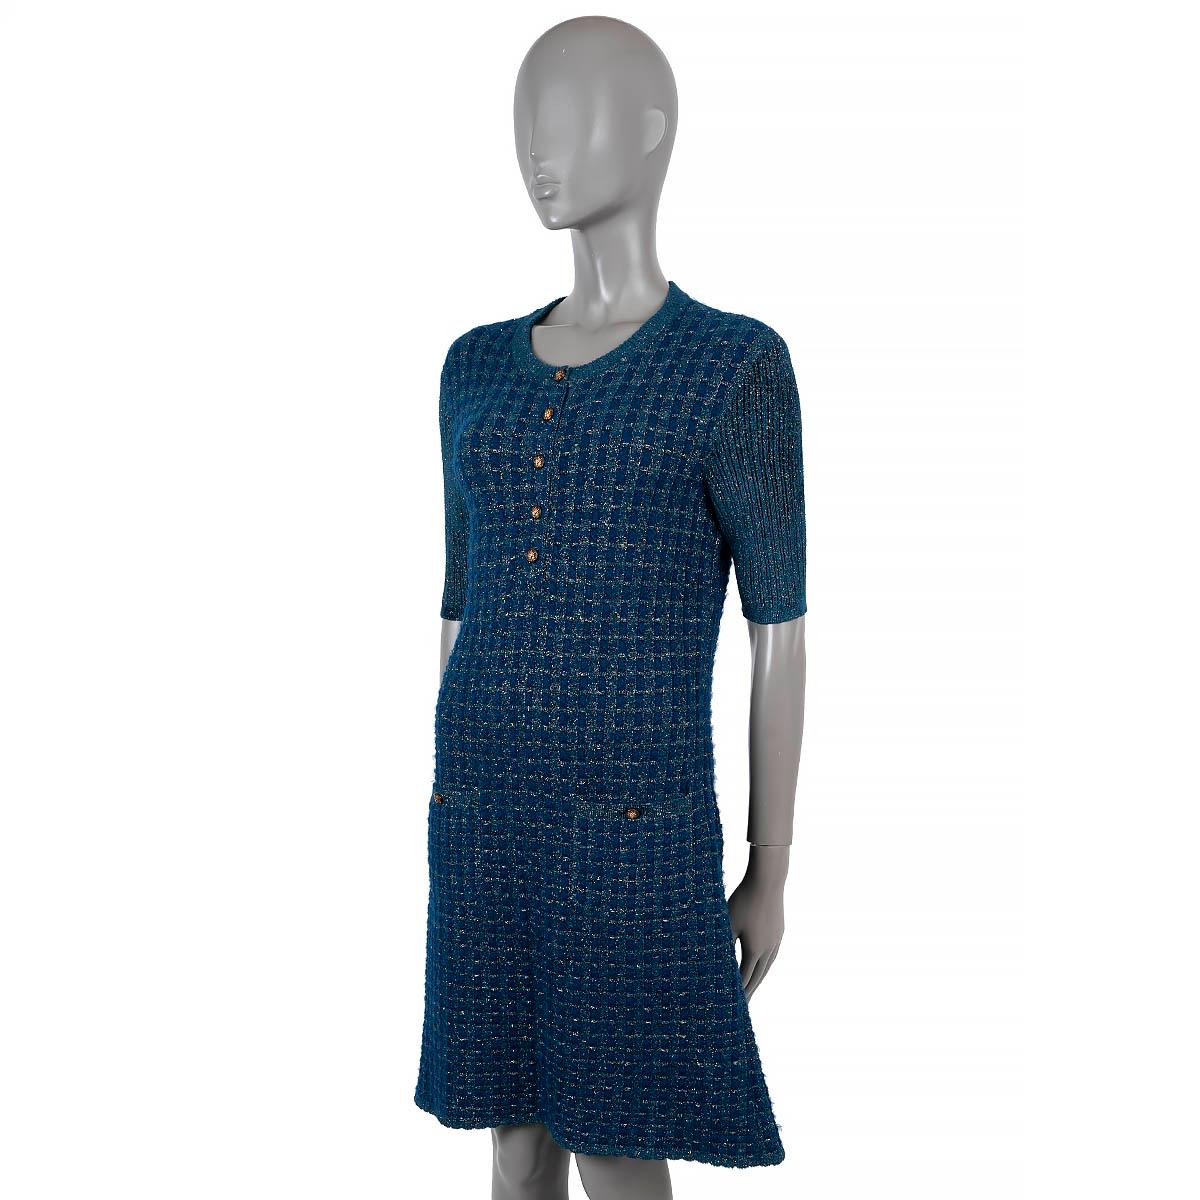 100% authentic Chanel lurex tweed dress in petrol blue and gold viscose (66%), polyester (22%), nylon (6%), mohair (4%) and wool (2%). Features short rib-knit sleeves, a crewneck and two buttoned patch pockets at the waist. Closes partially with